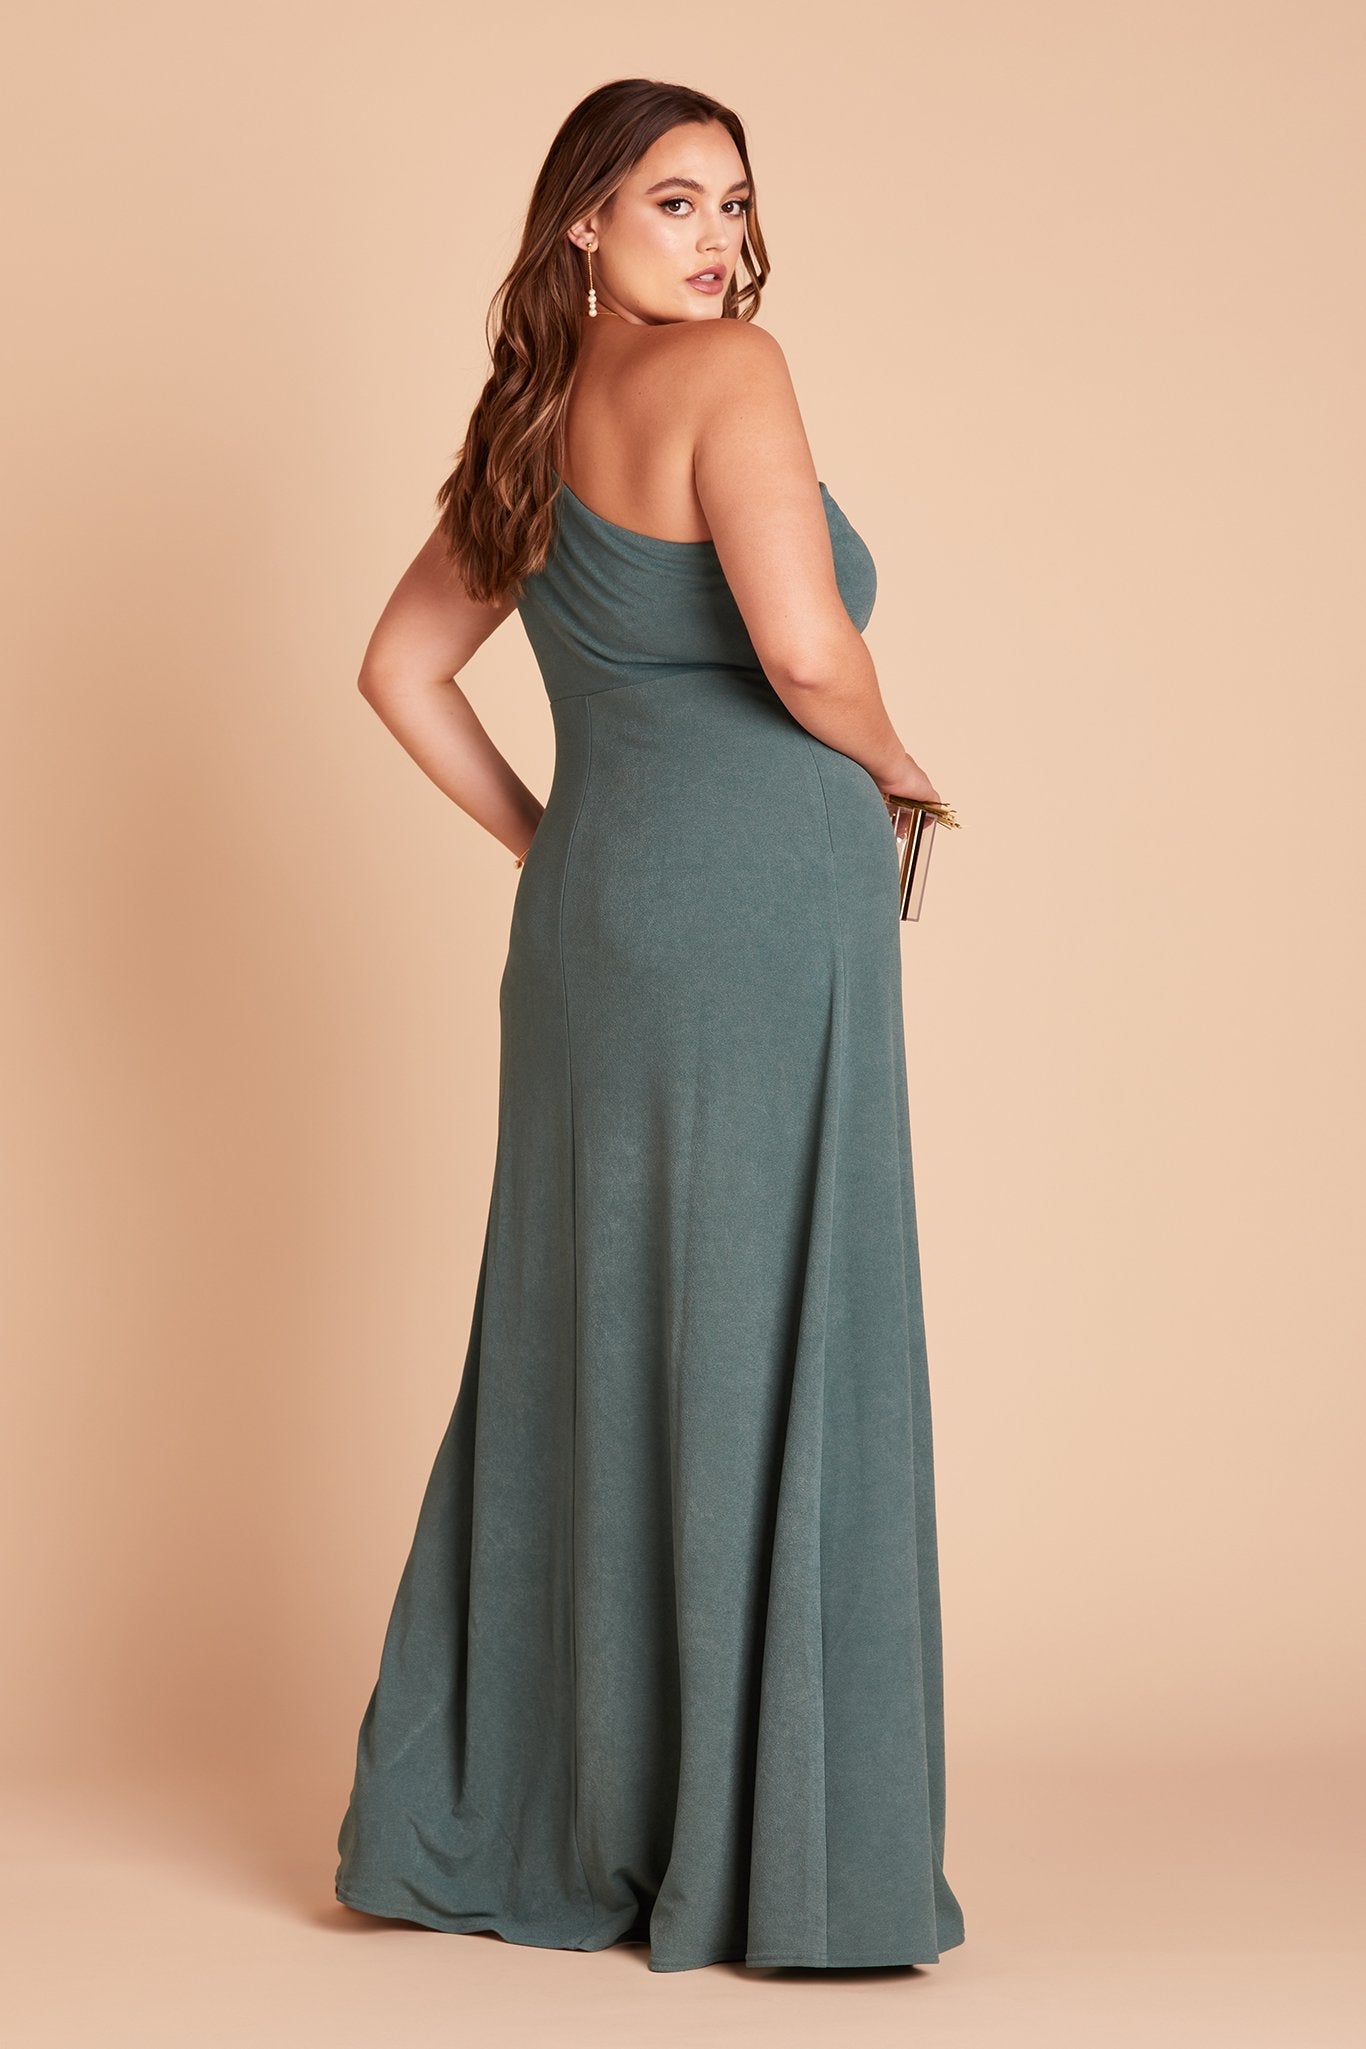 Kira plus size bridesmaid dress with slit in sea glass green crepe by Birdy Grey, side view